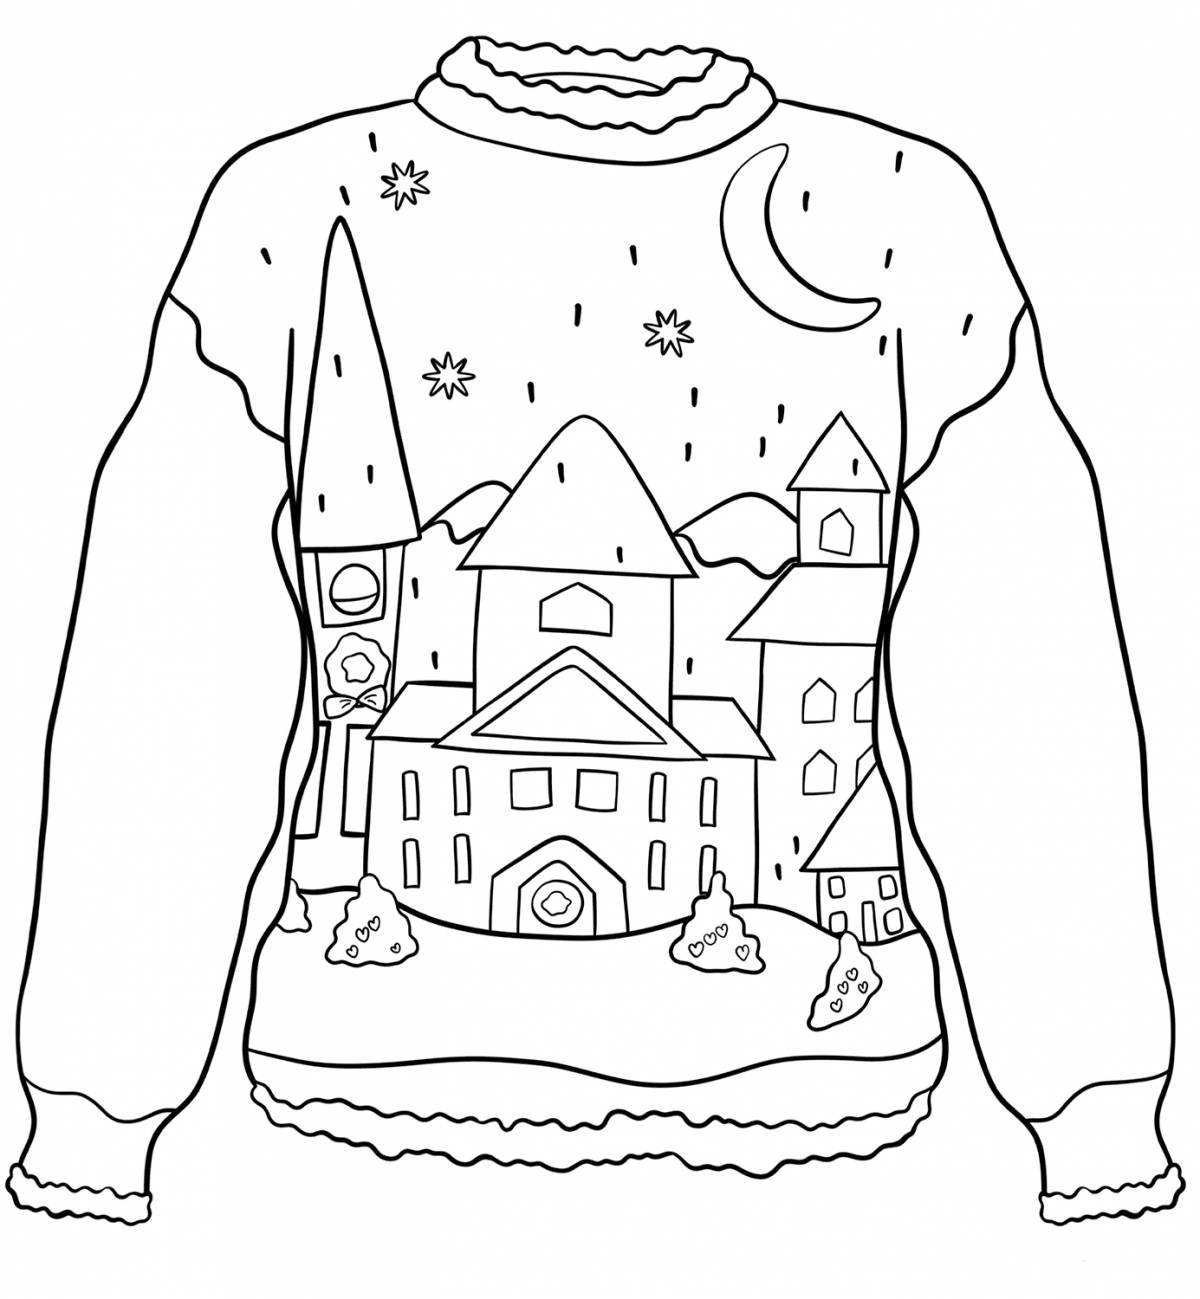 Whimsical sweater coloring for kids